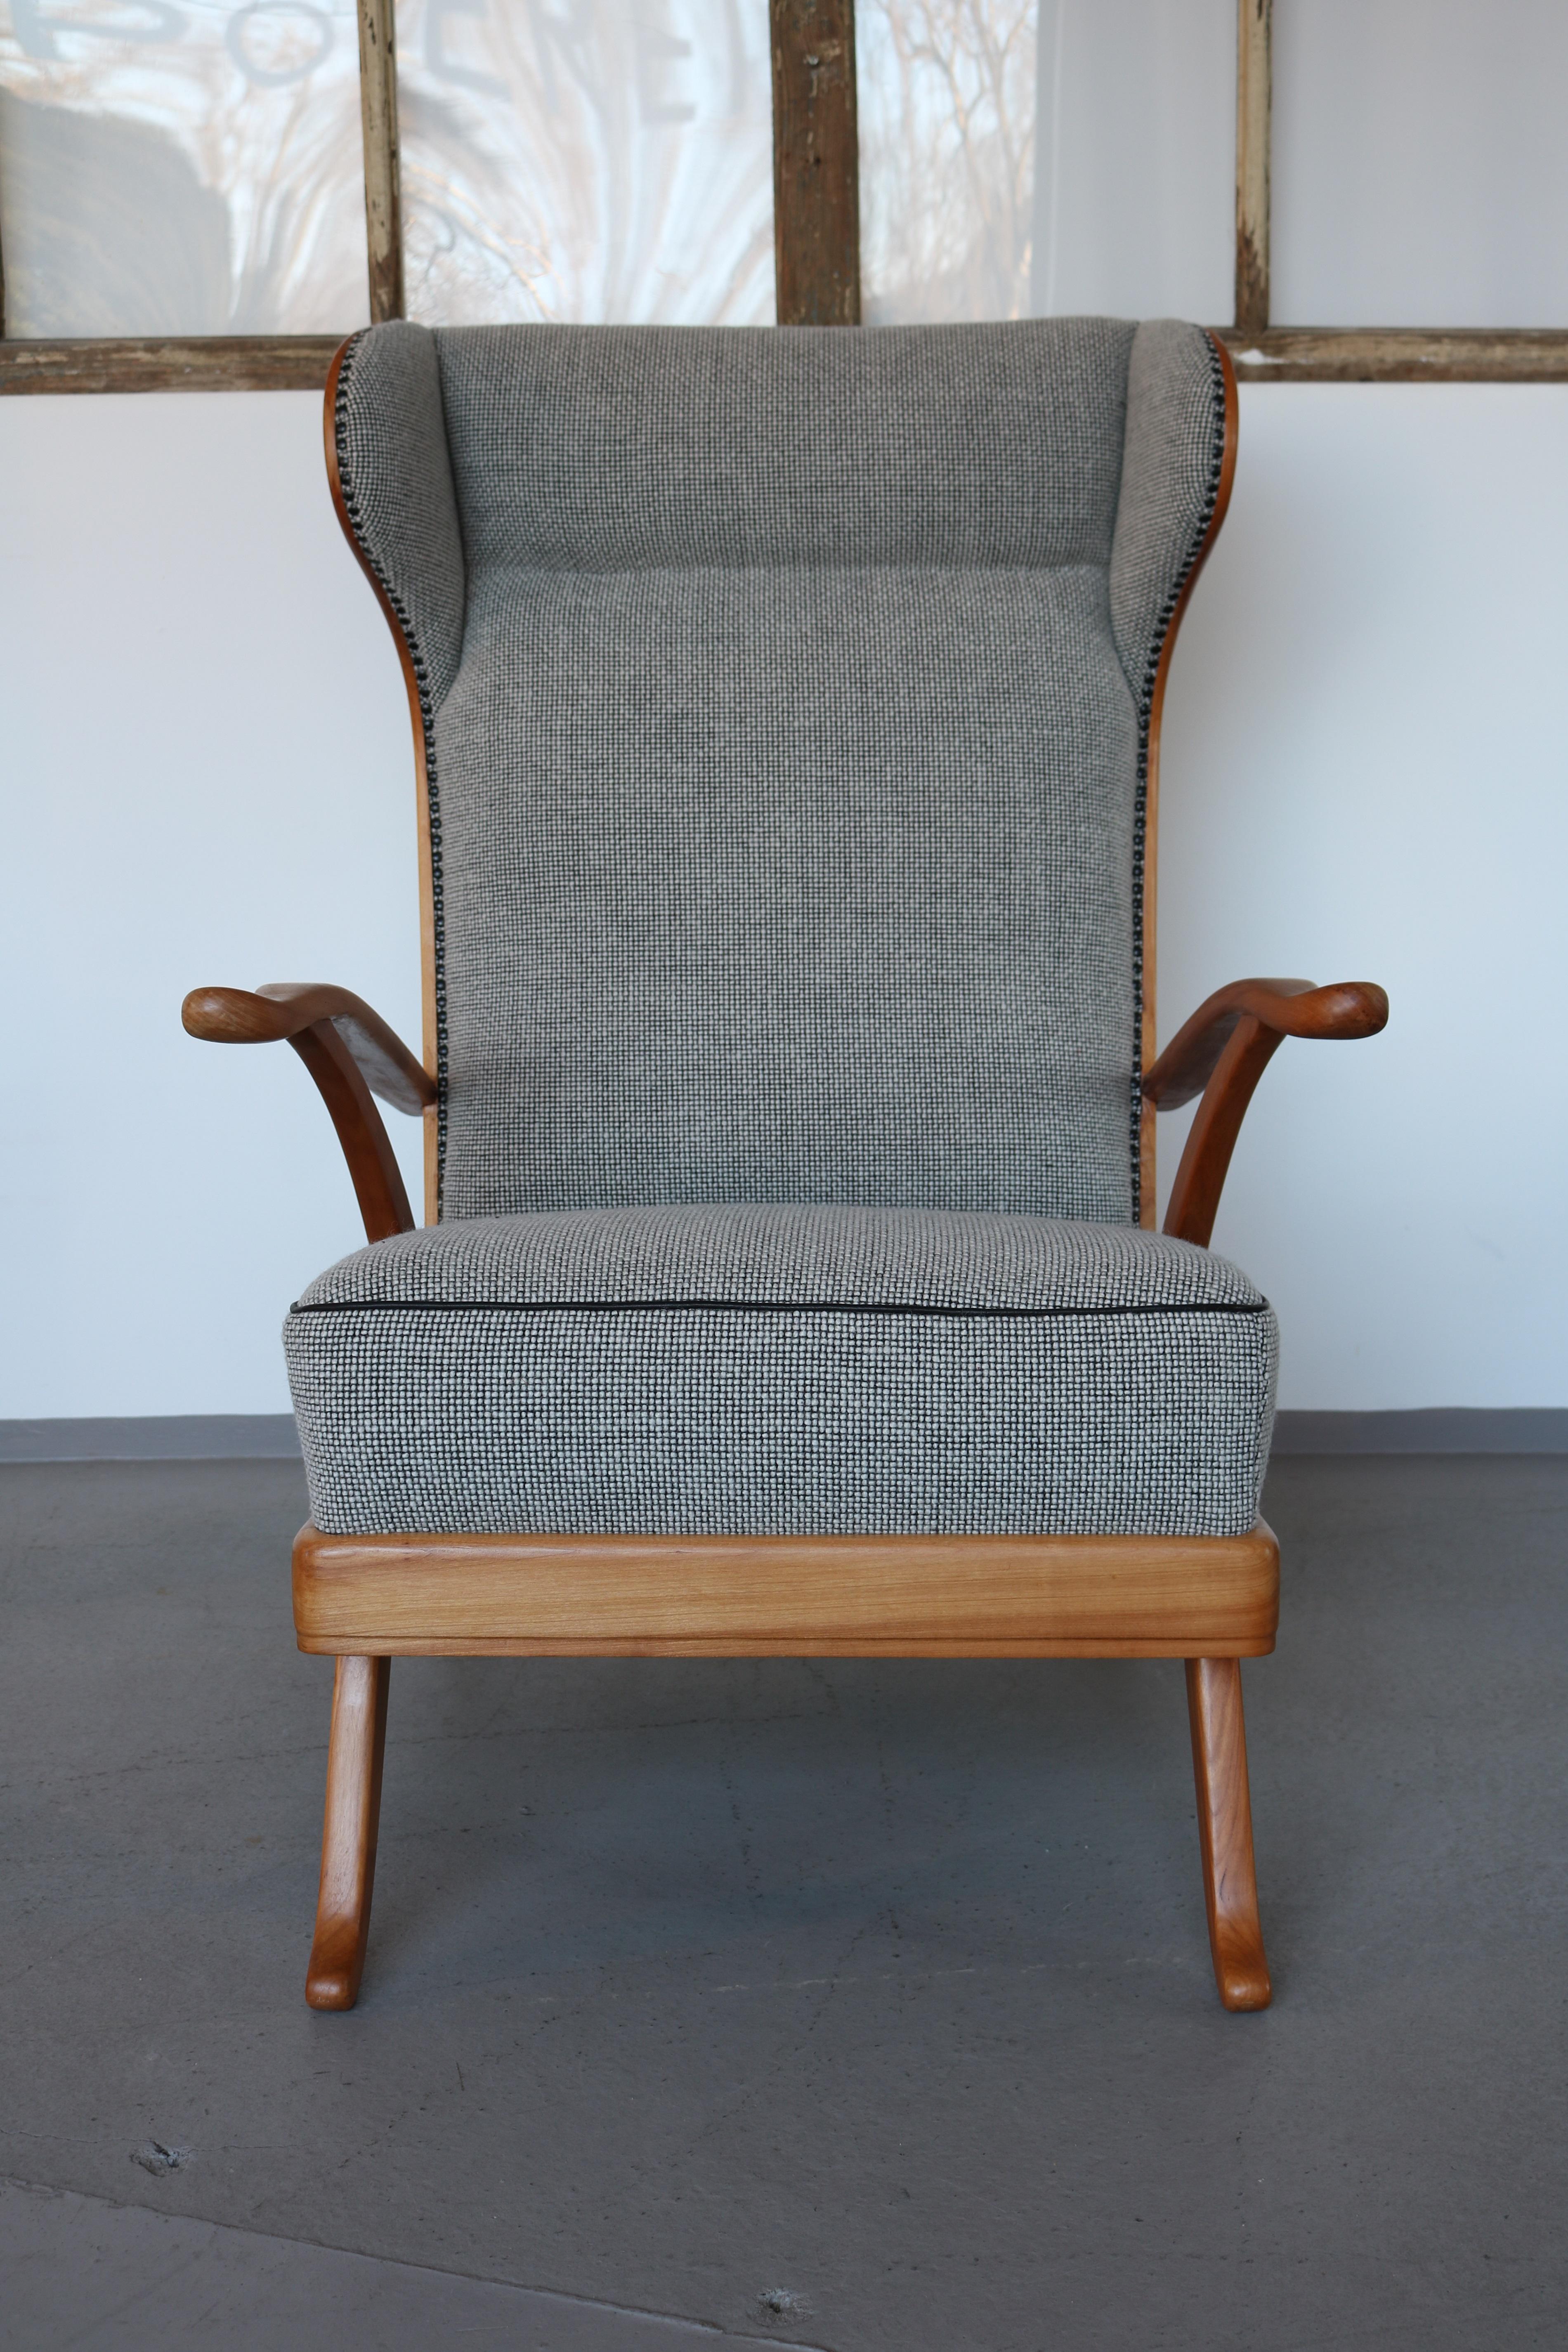 Wingback chair design Karl Nothhelfer for Schörle & Gölz, Stuttgart-Bad Cannstatt 1950s.
The frame is made of solid cheerywood. The upholstery has been completely redesigned and upholstered with a high-quality new-wool fabric in salt-pepper from